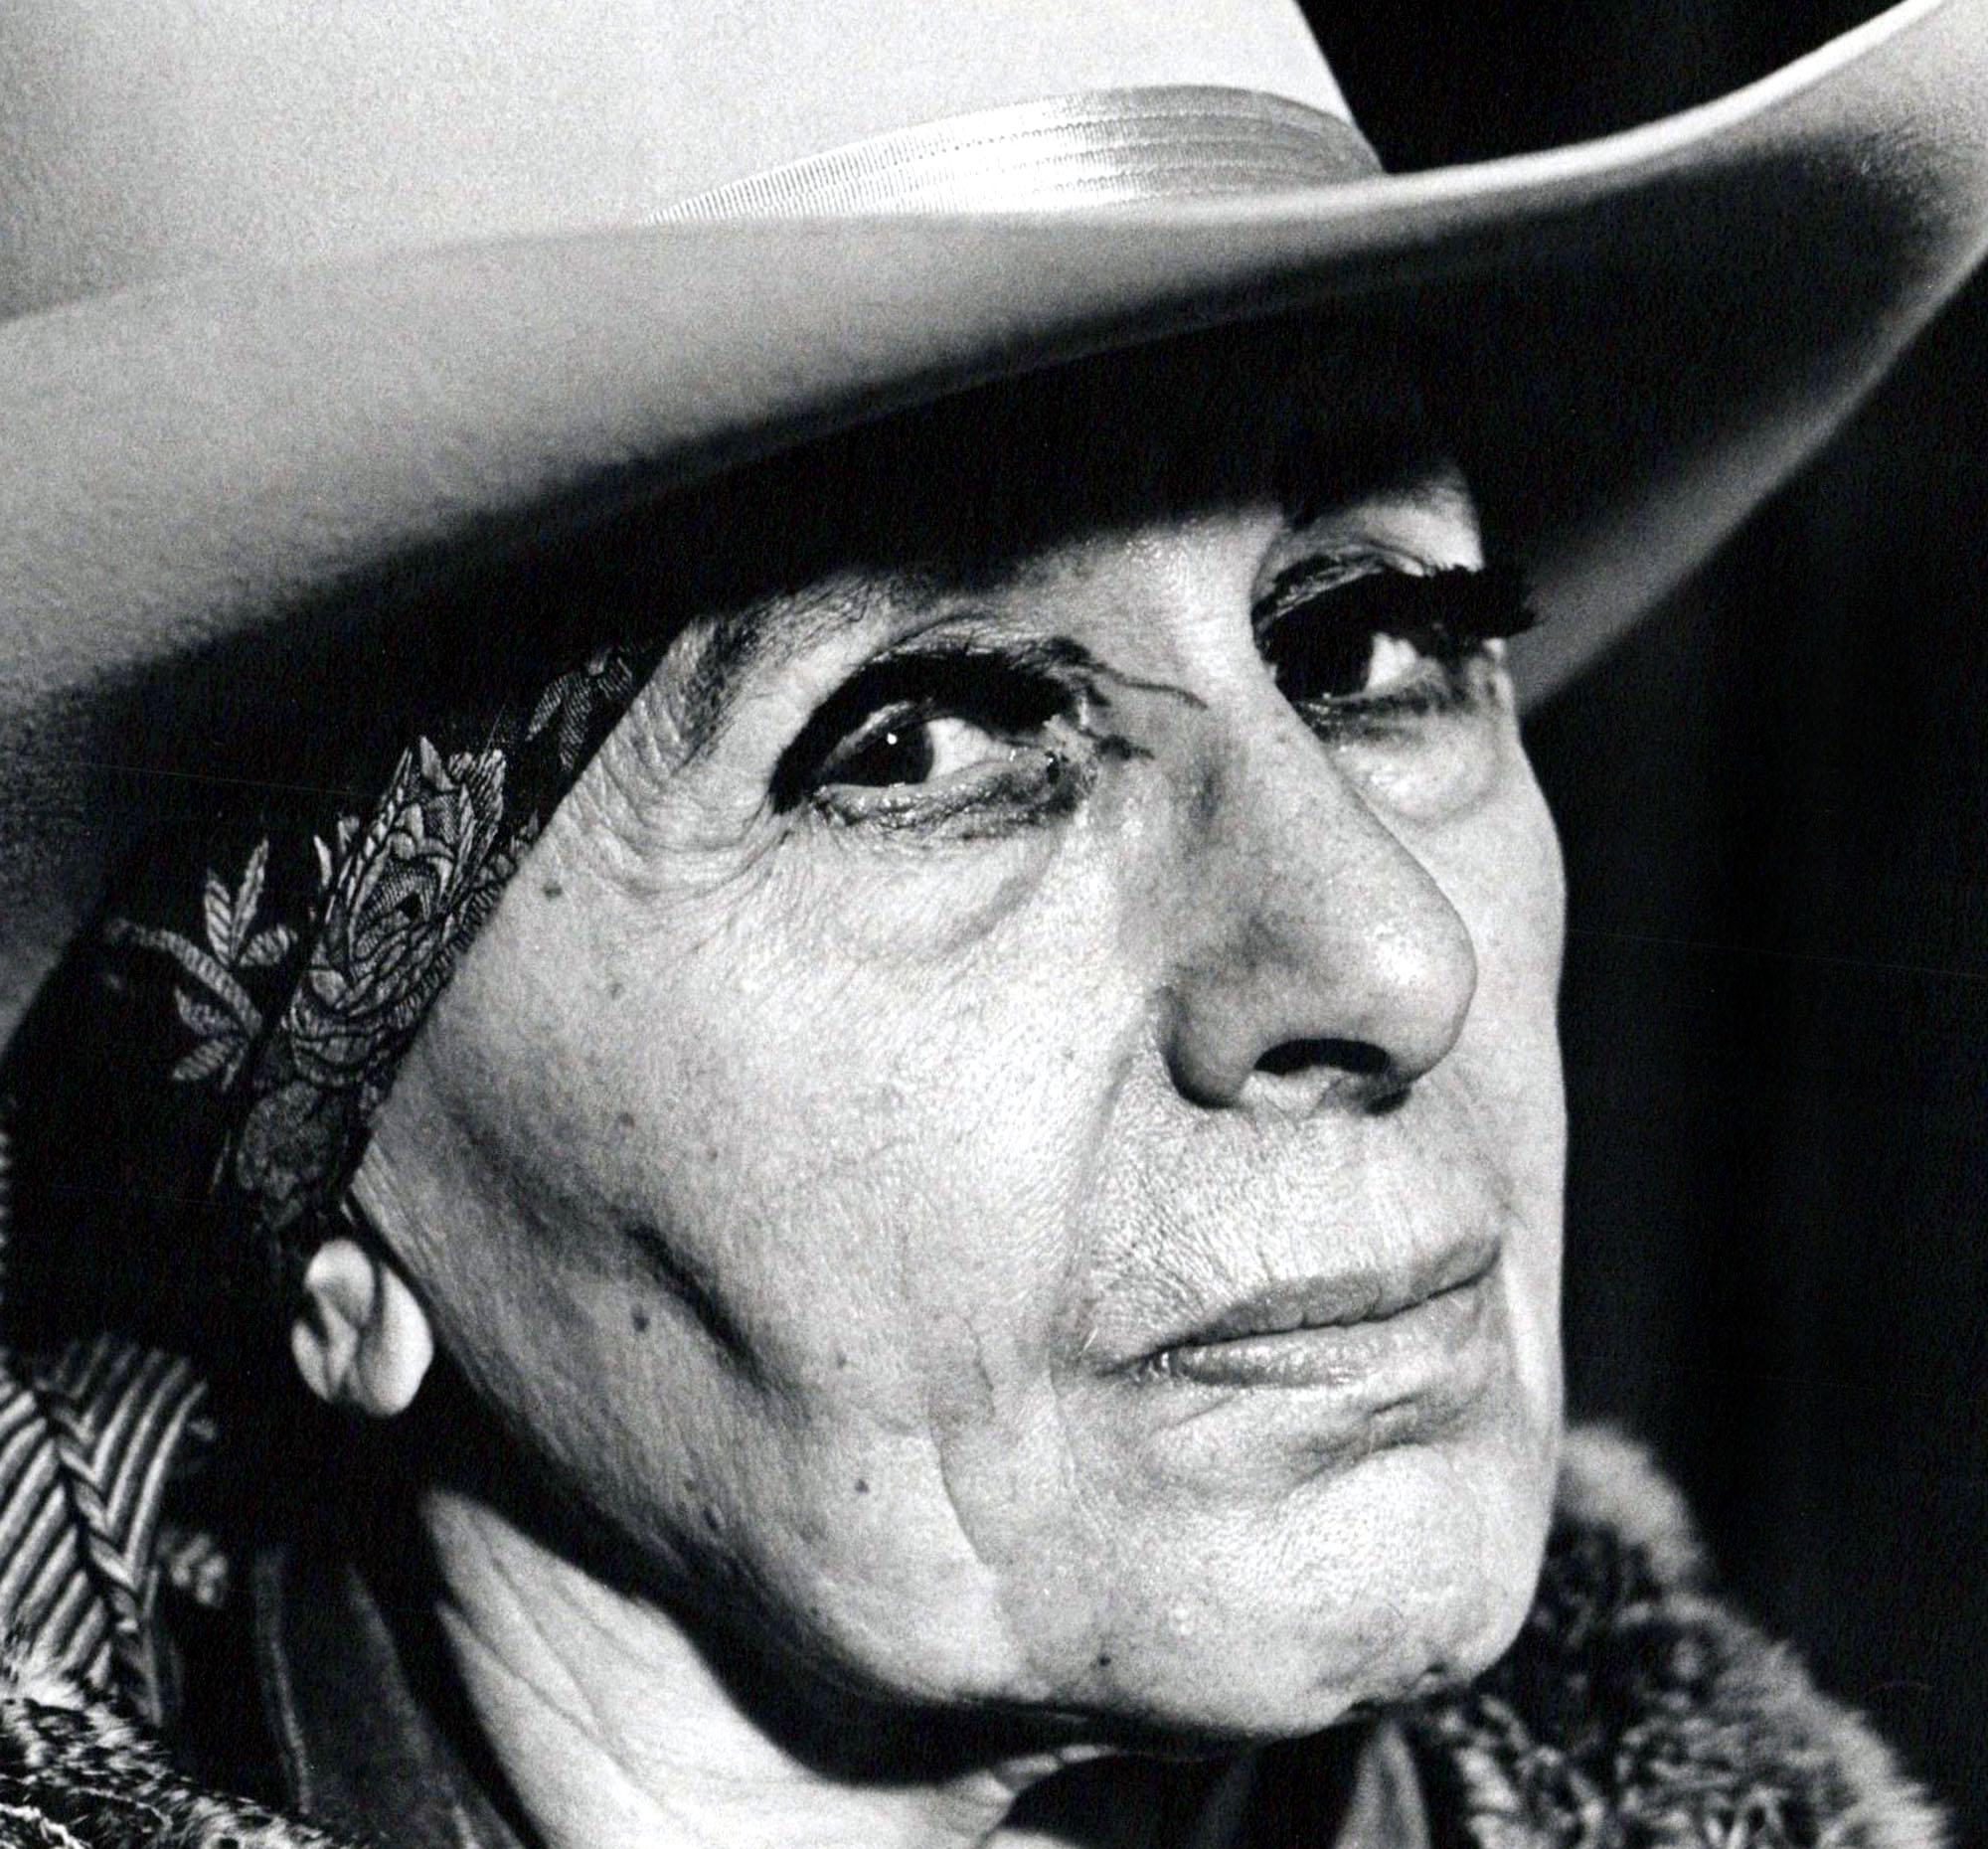 Sculptor Louise Nevelson photographed in her New York City studio - Photograph by Jack Mitchell